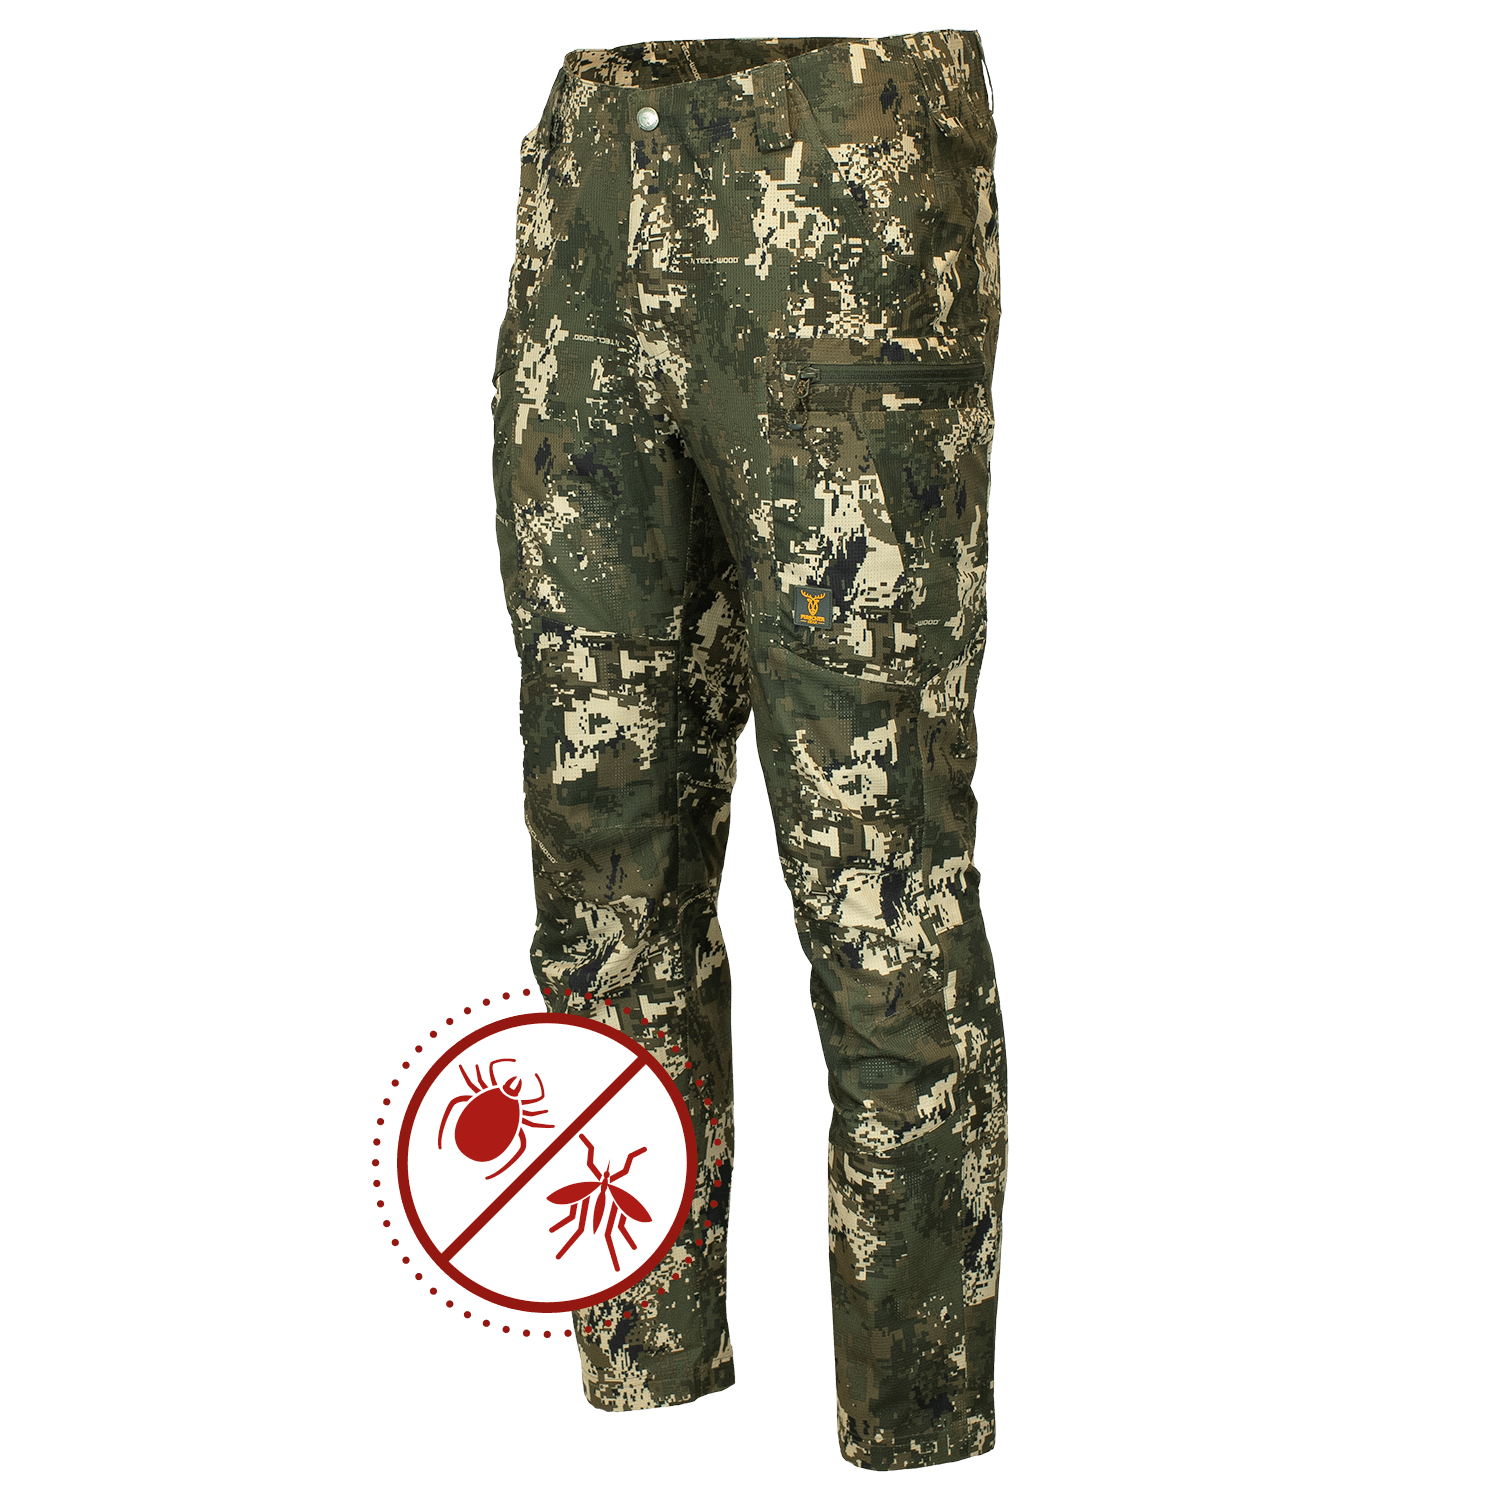 Pirscher Gear Ultralight Tanatex Pants (Optimax) - Insect Protection